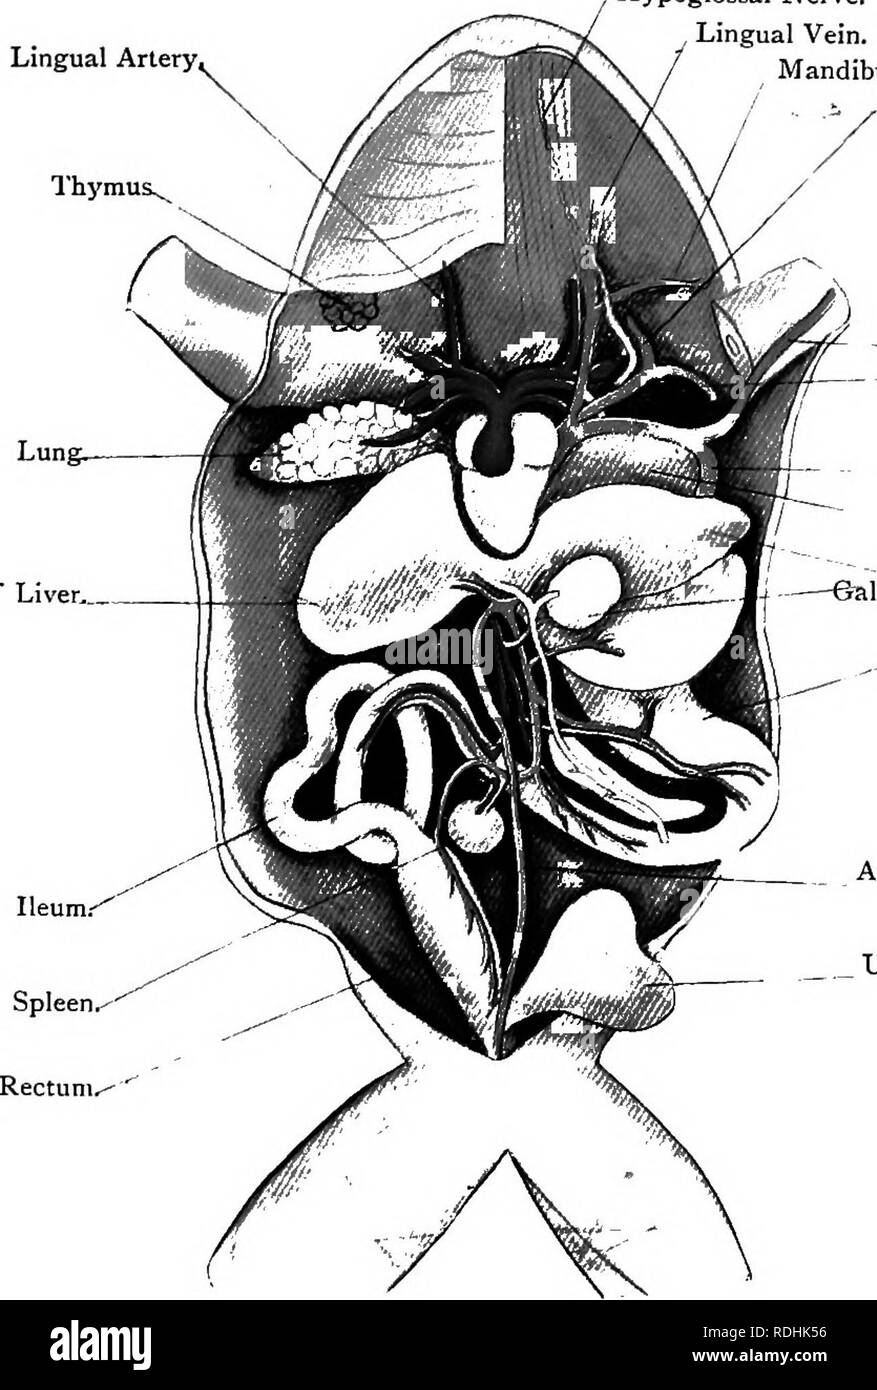 . Elementary text-book of zoology. Plate v.—Second Dissection of the Frog. {Ad nat.) Lingual Artery, I'hyraus^ Hypoglossal Nerve, Lingual Vein. Mandibular. Right Lobe of Liver... - /Internal Jugular, - Brachial Vein. -Sub-scapular.   Musculo- cutaneous. Ant. Wall of Pel visceral Cavit ^'-- - .Rt. Lobe of Liver, 6all-bladder. , Stomach (below i lies the Pancrea' and Bile-duct). Anterior Abdominal Vein.   Urinary Bladder. The ventral body wall is cut open by a median incision from chin to vent through the sternum.   The pectoral girdle is completely removed and the body wall pinned out. The mylo Stock Photo